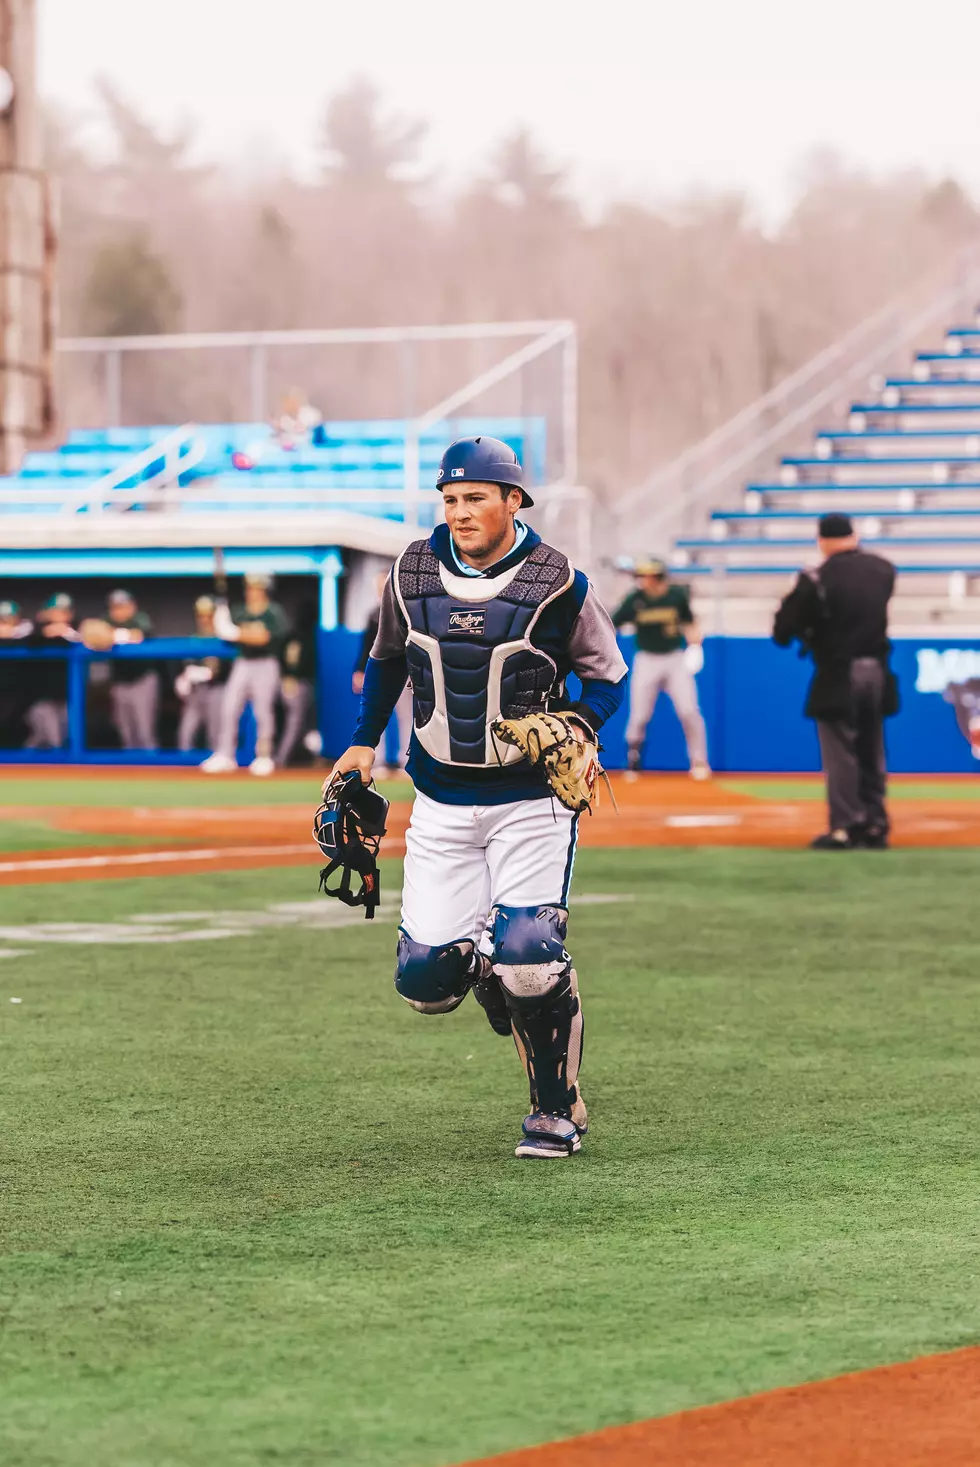 Friday’s Maine-Albany Baseball Game Postponed – Doubleheader Saturday March 30th